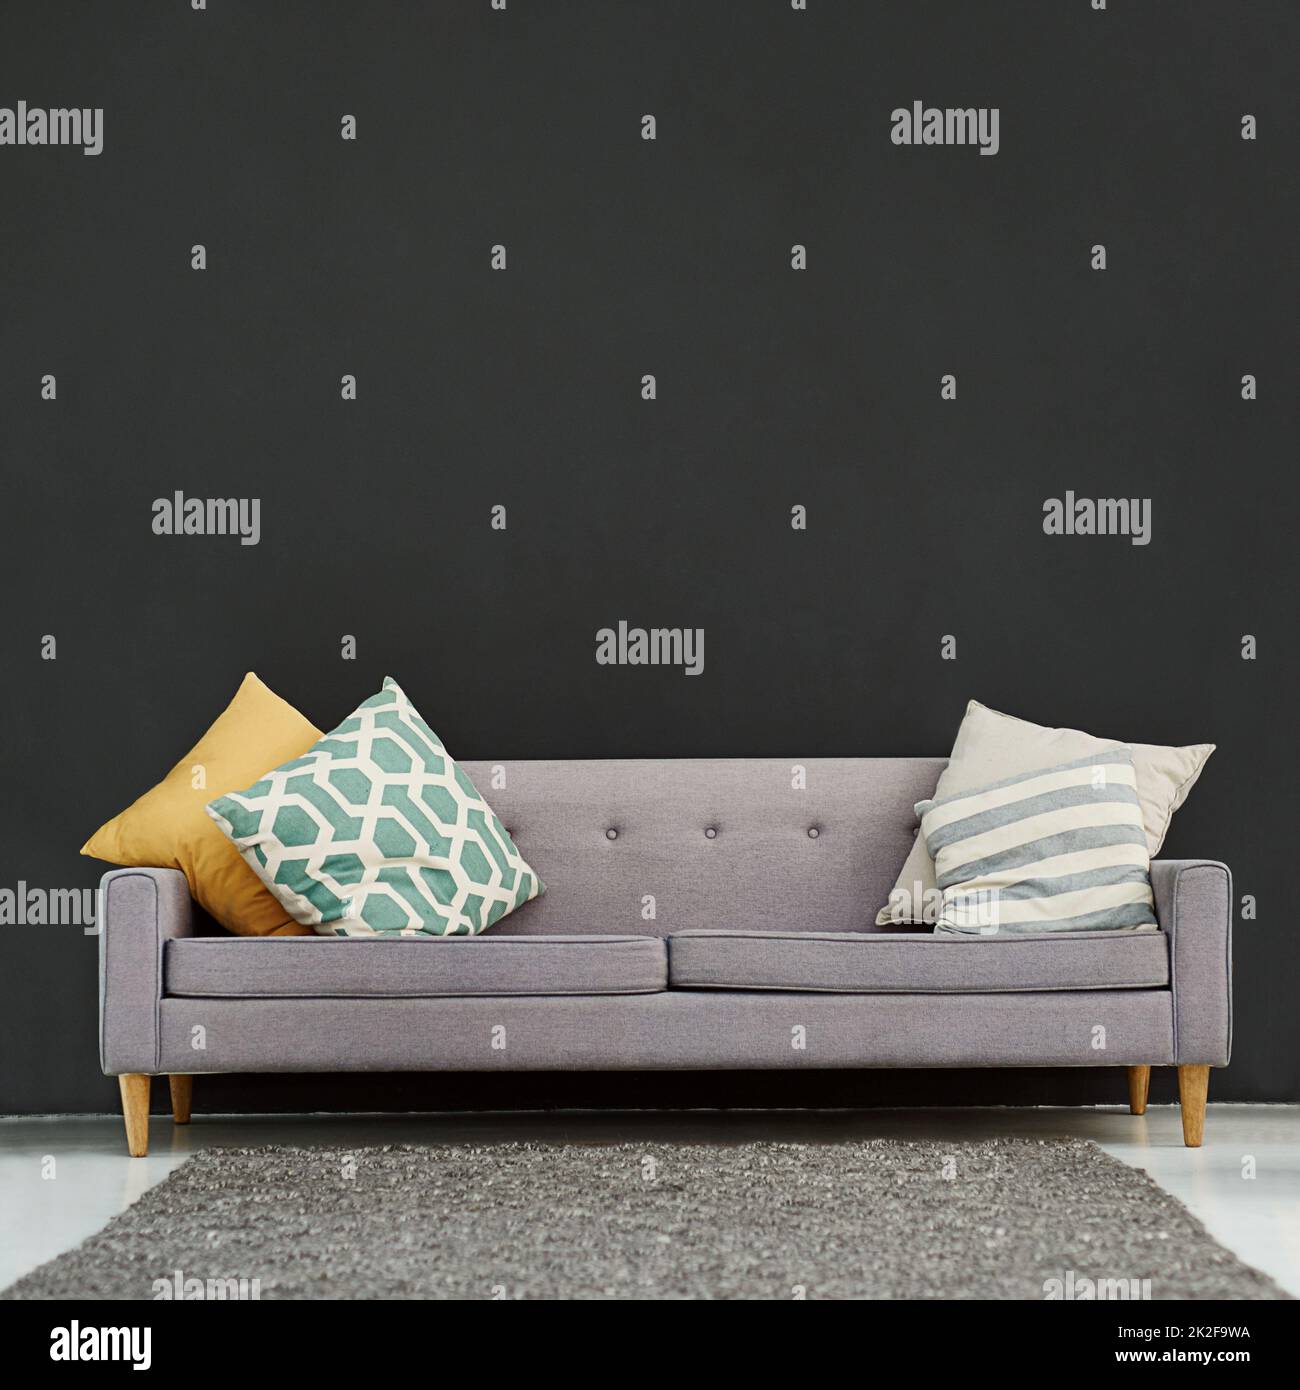 Functional and stylish for your office or home. Shot of a gray sofa with cushions against a black background. Stock Photo